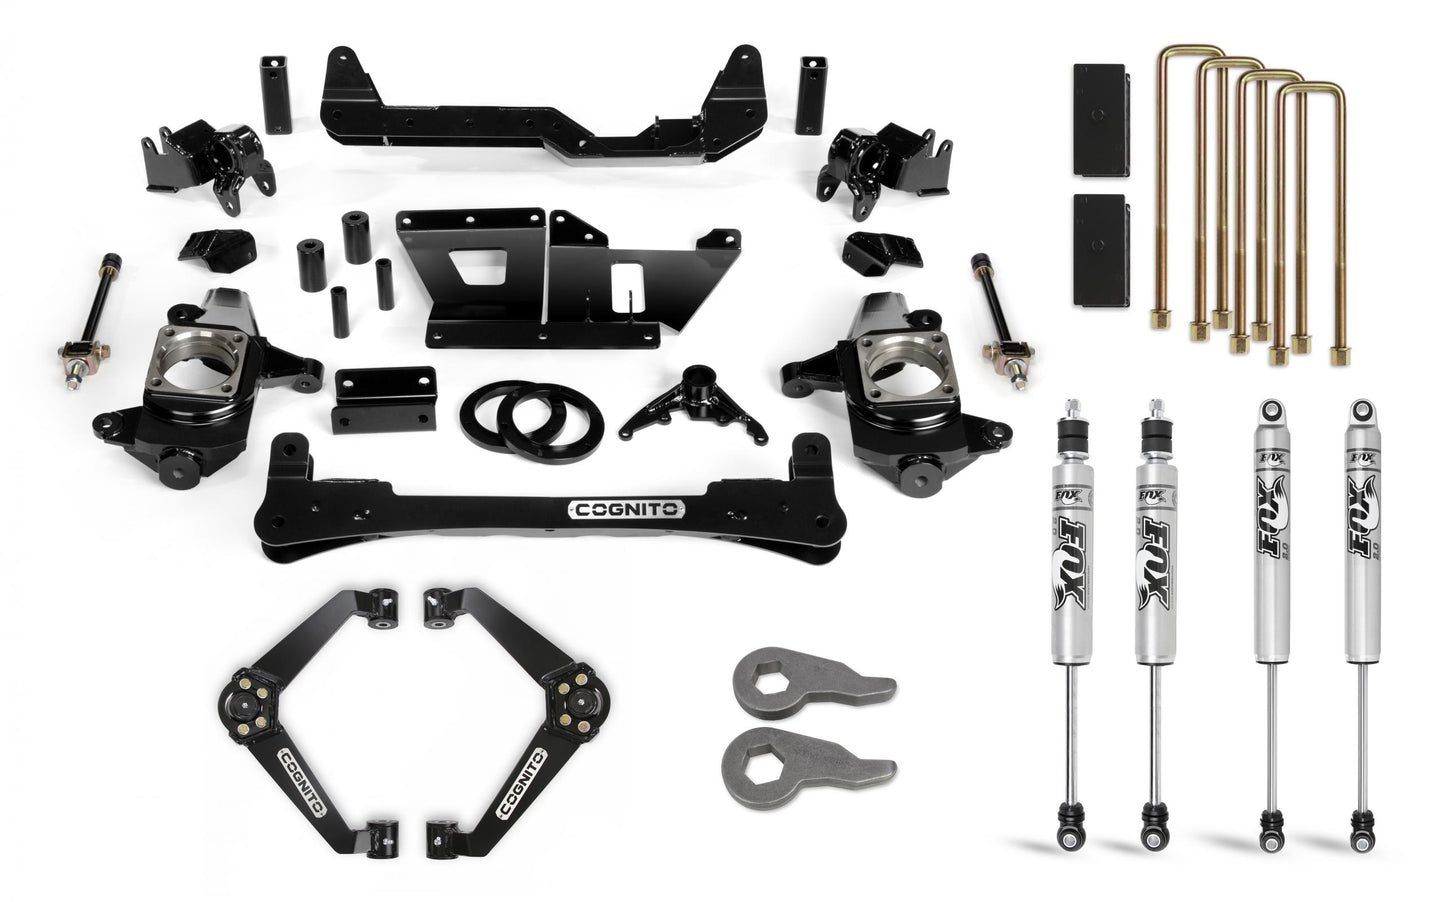 Cognito 6-Inch Standard Lift Kit with Fox PS 2.0 IFP Shocks for 01-10 Silverado/Sierra 2500/3500 2WD/4WD